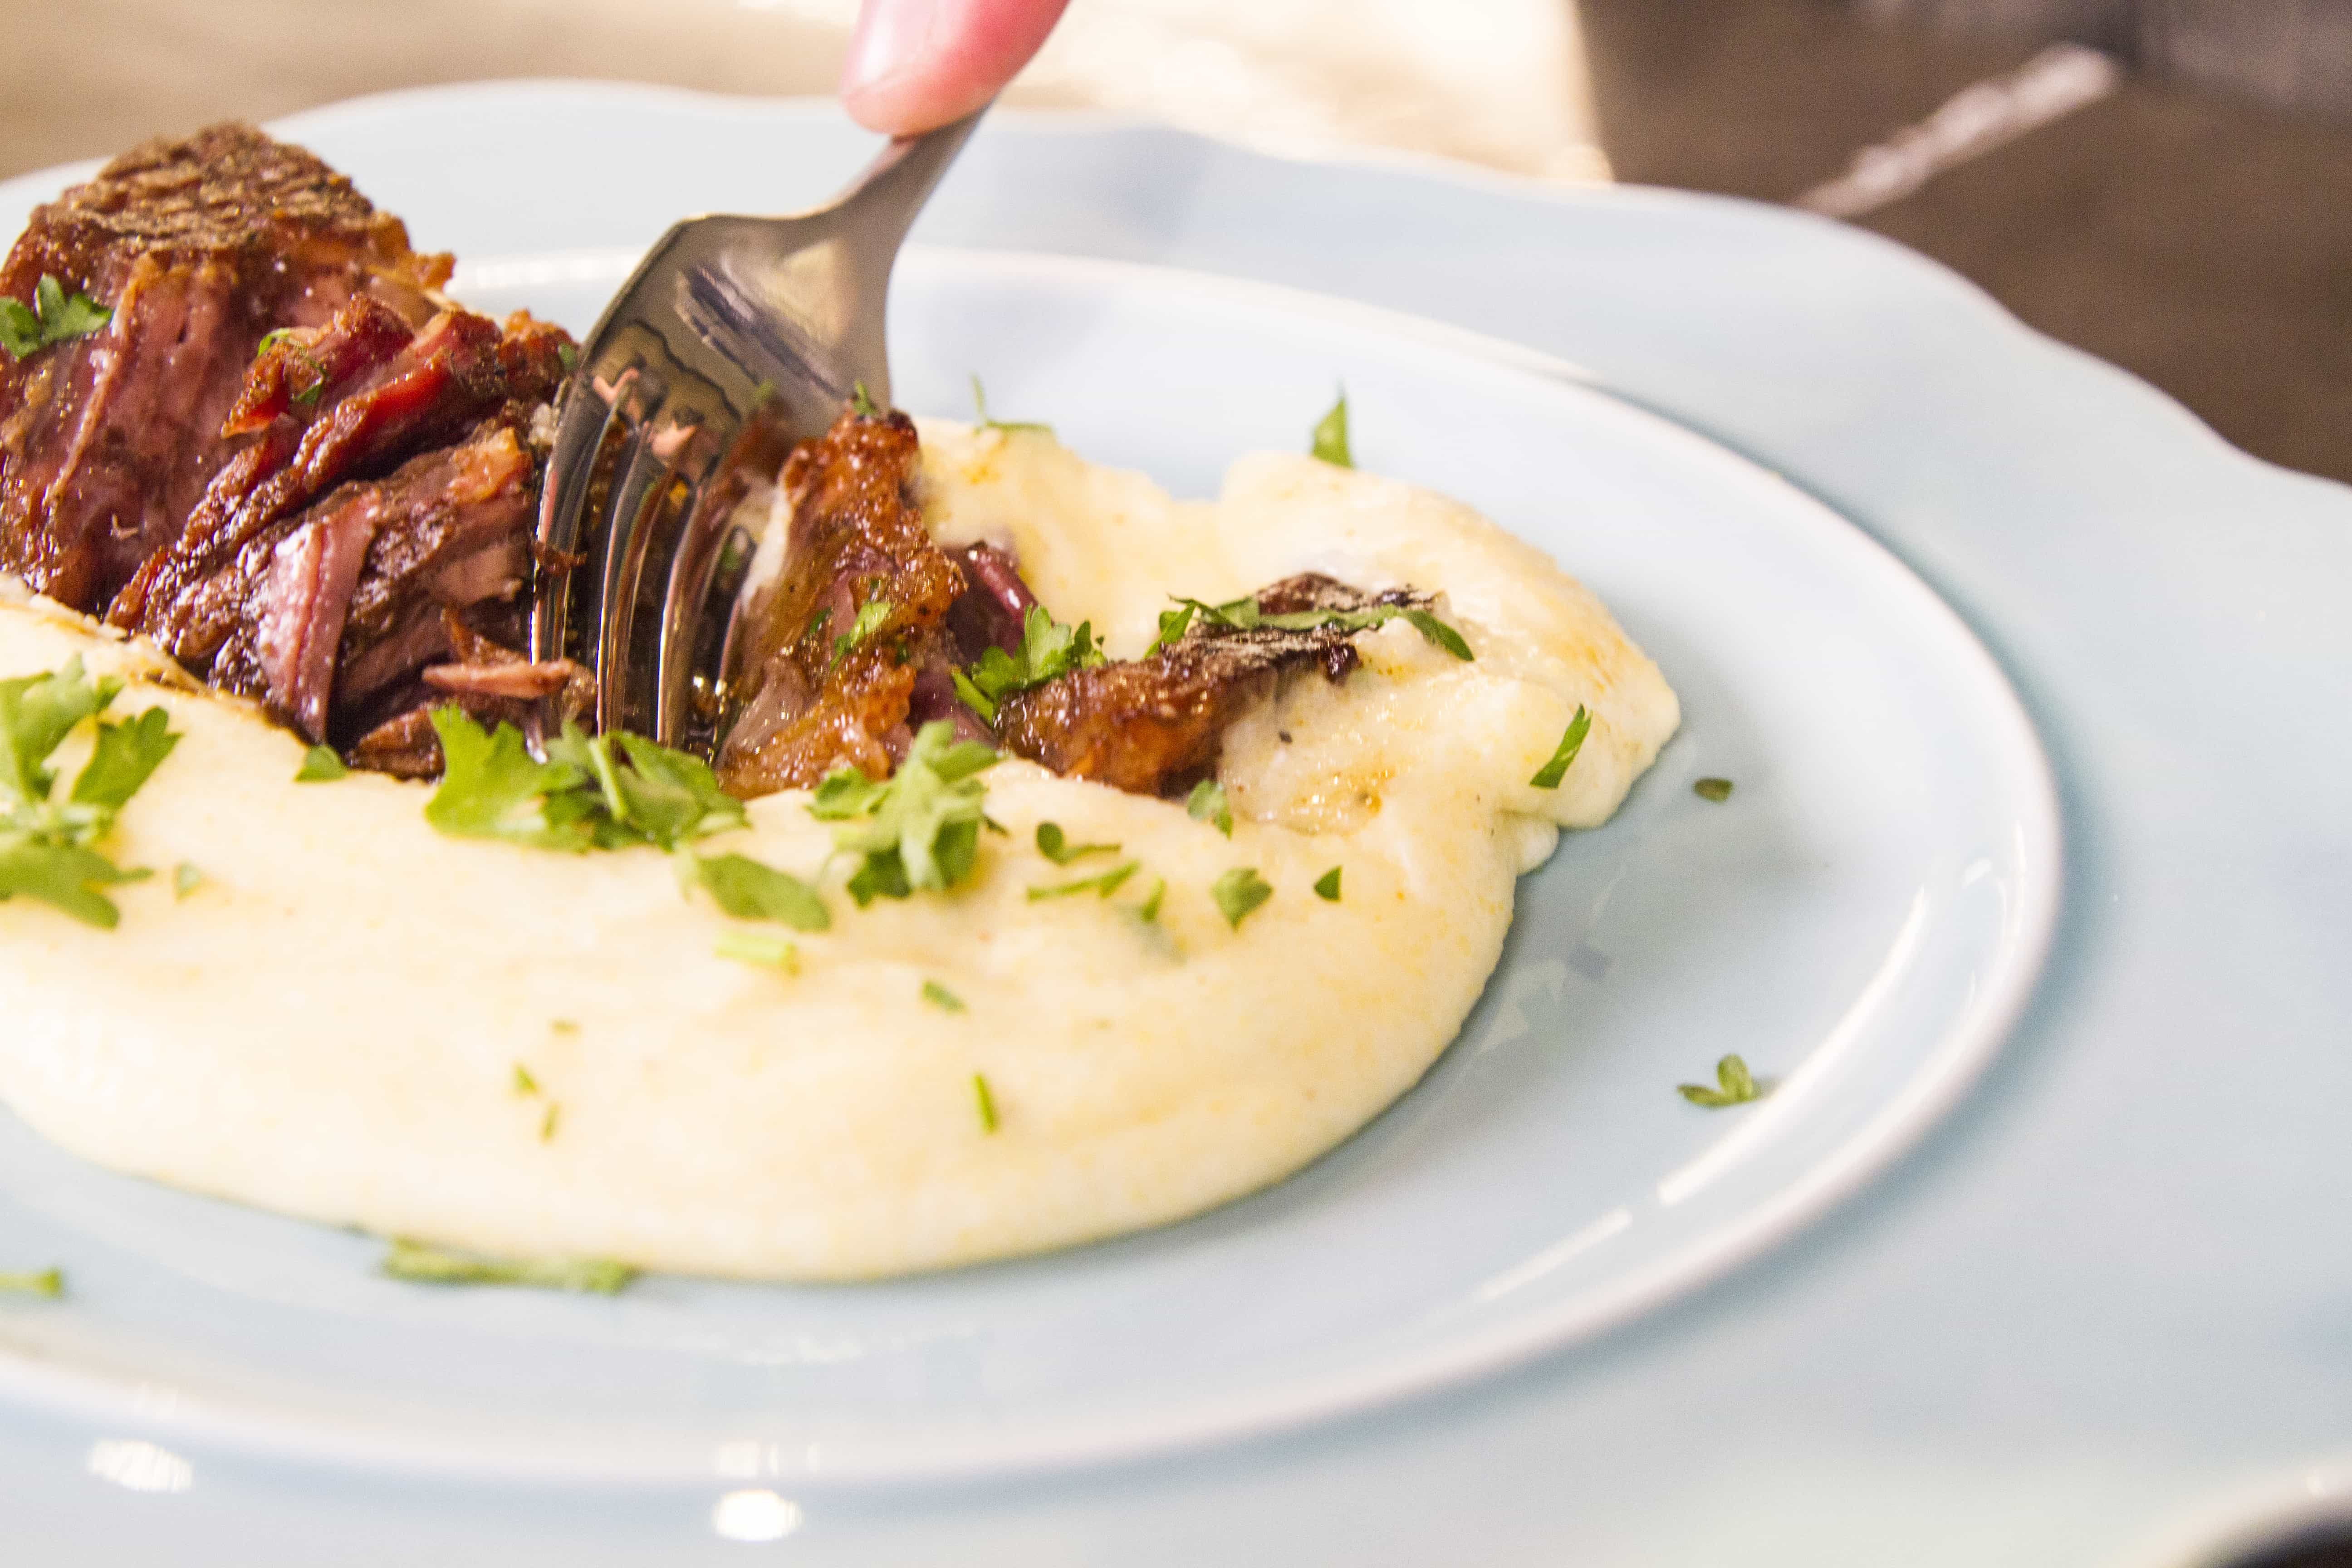 Confit of brisket with goat cheese polenta